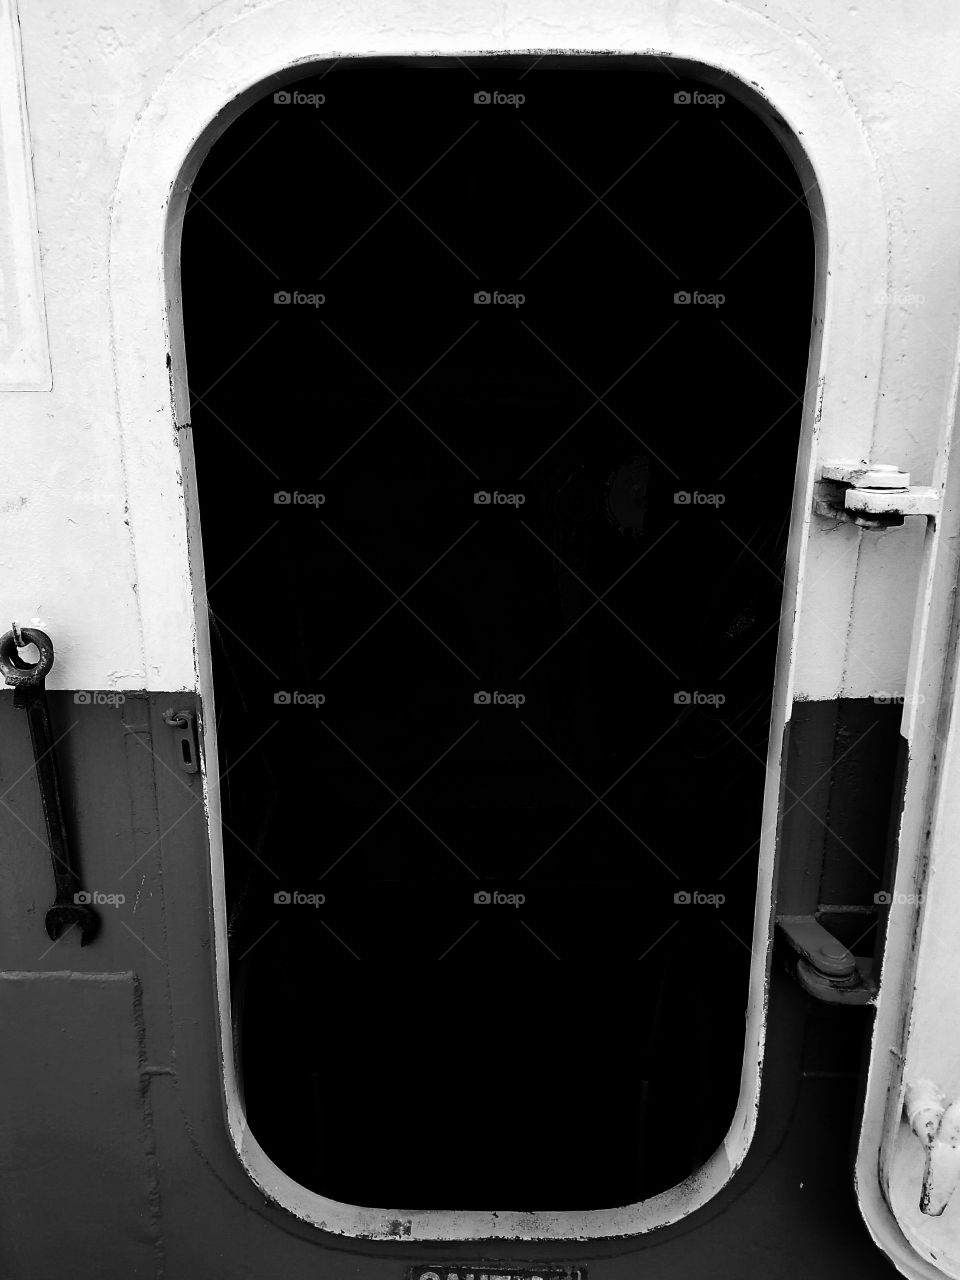 Hull access door in black and white